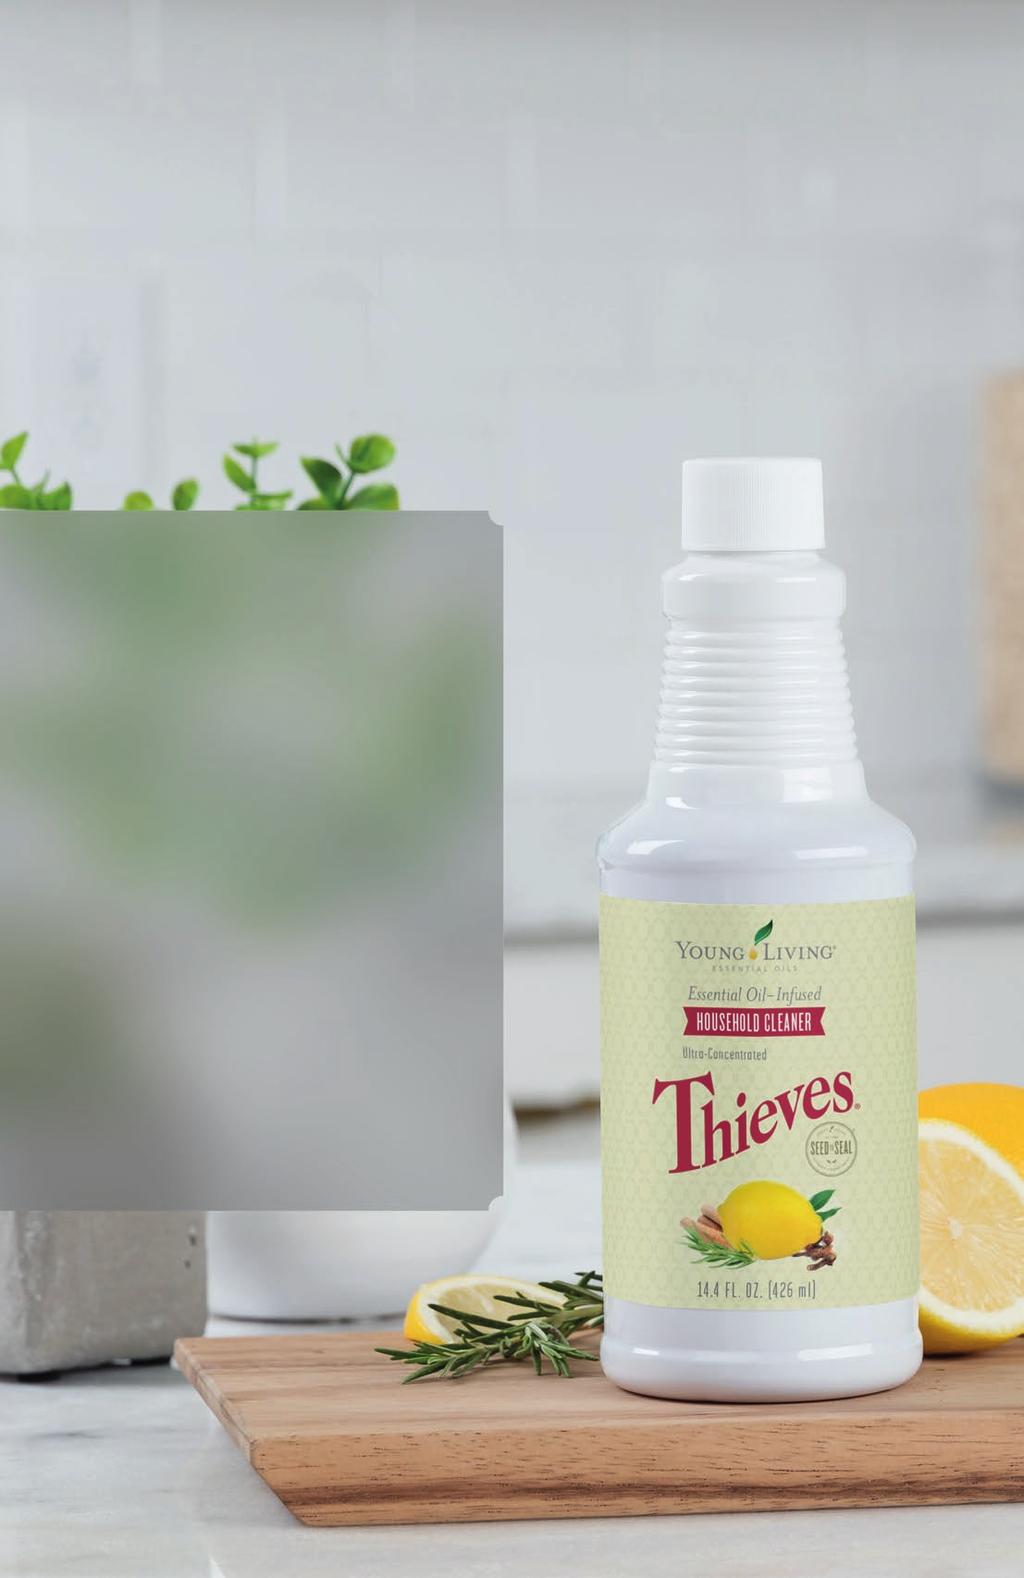 KEEP YOUR HOME CLEAN AND FRESH WITH THIEVES Whether you need to clean carpets, scrub bathroom tiles, or freshen your kitchen, our powerful and safe Thieves products have you covered.